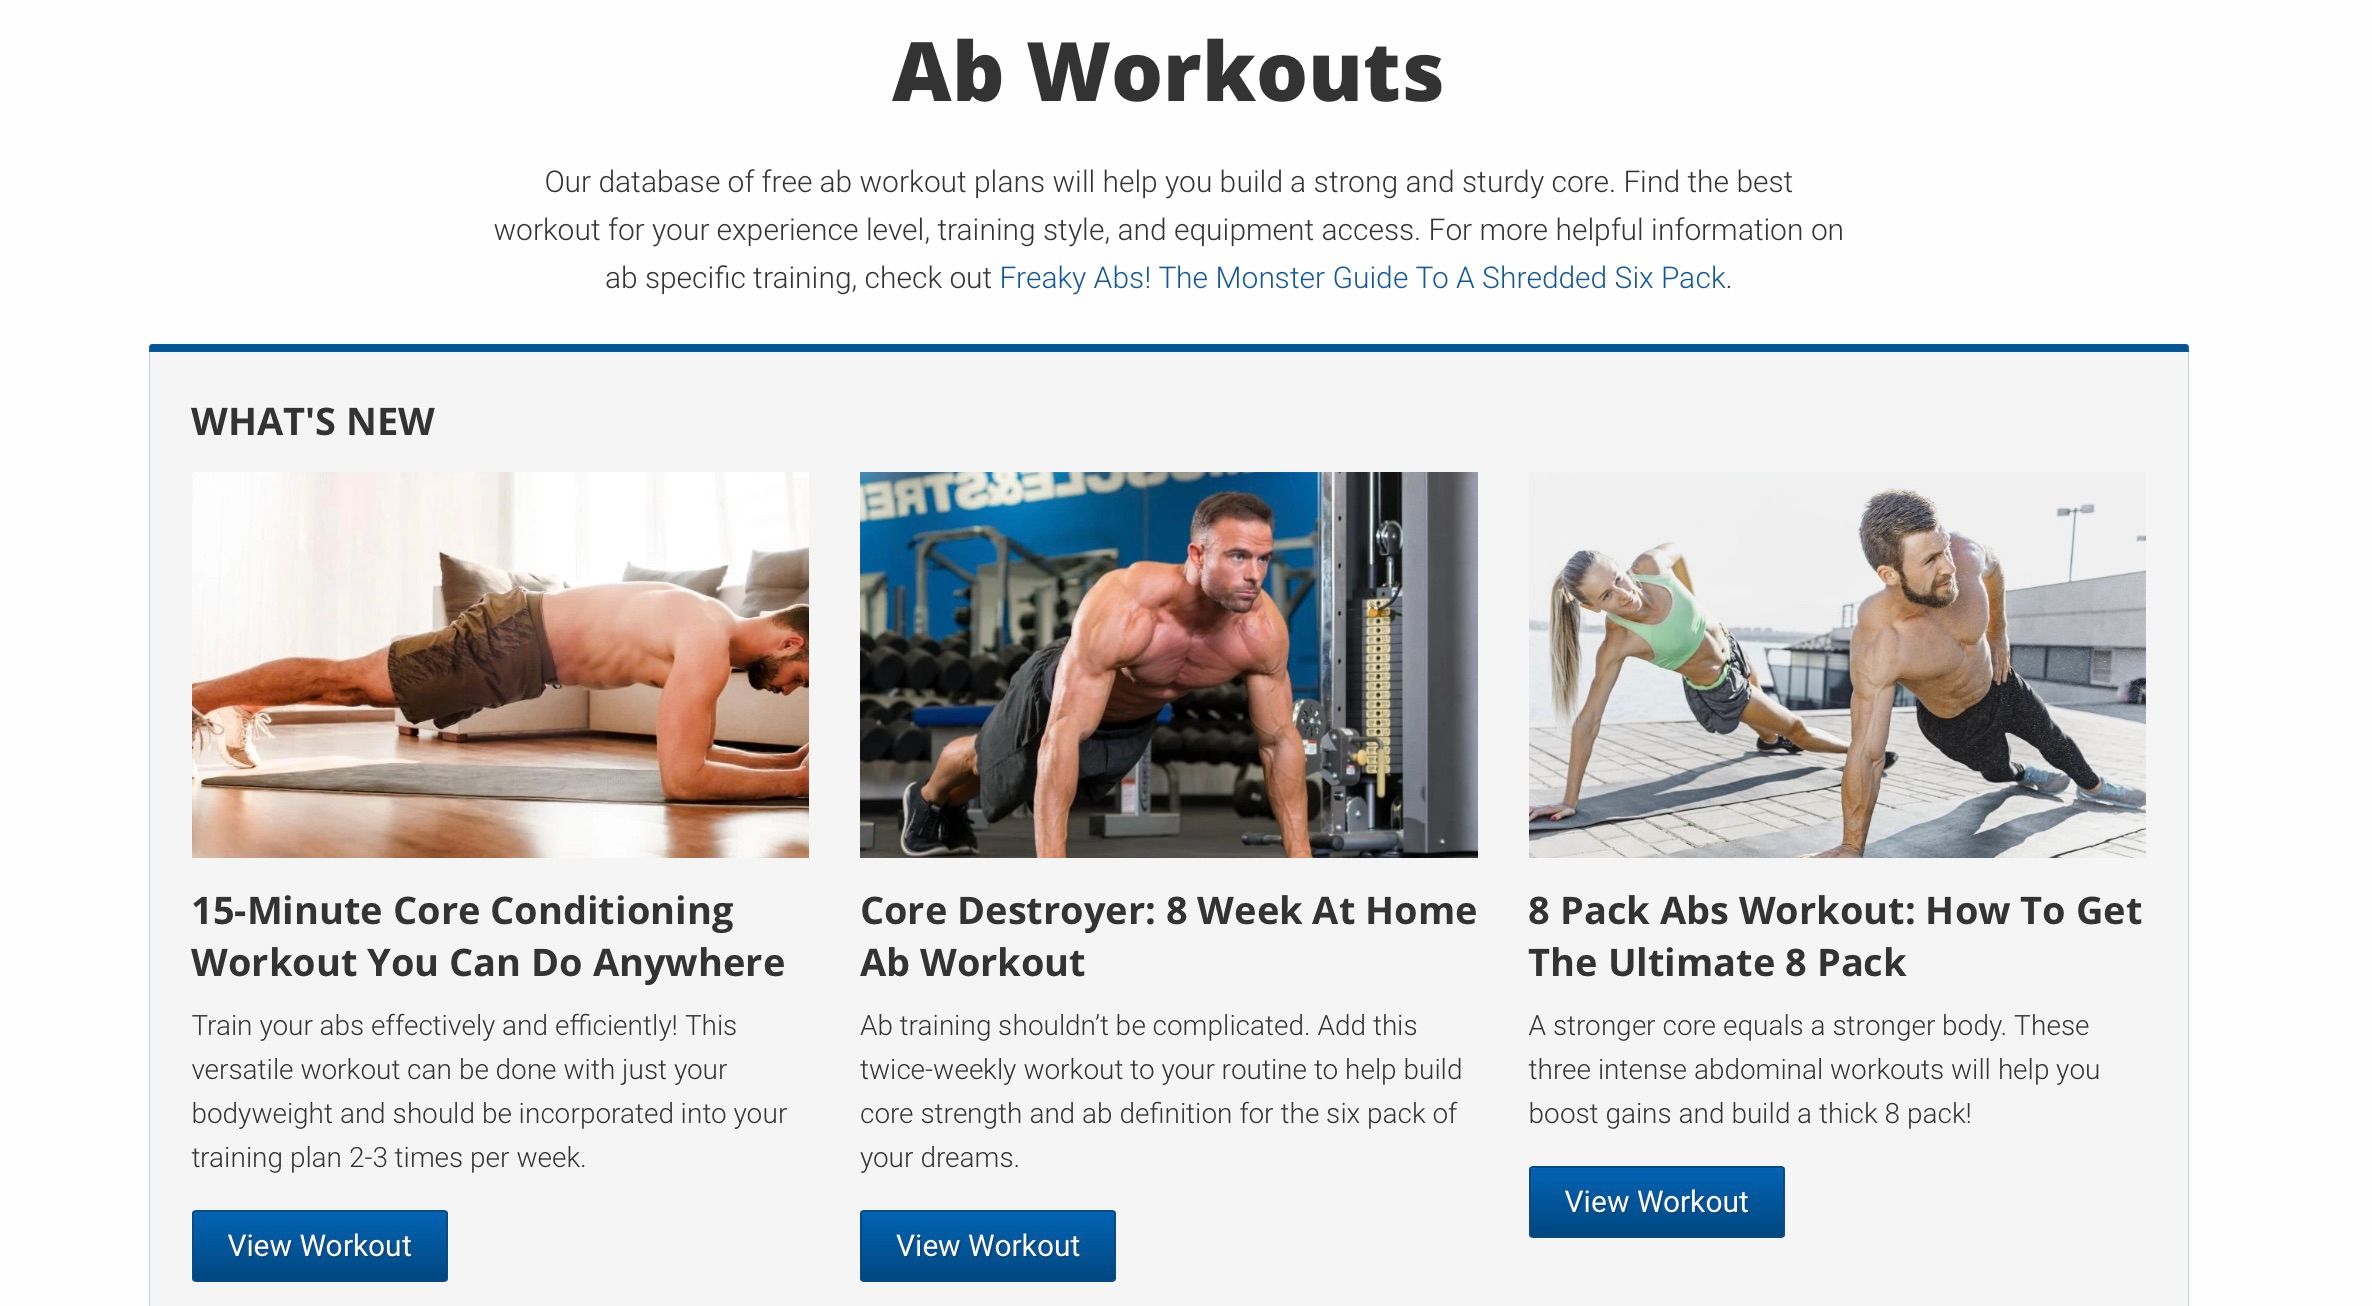 8 Pack Abs Workout: How To Get The Ultimate 8 Pack